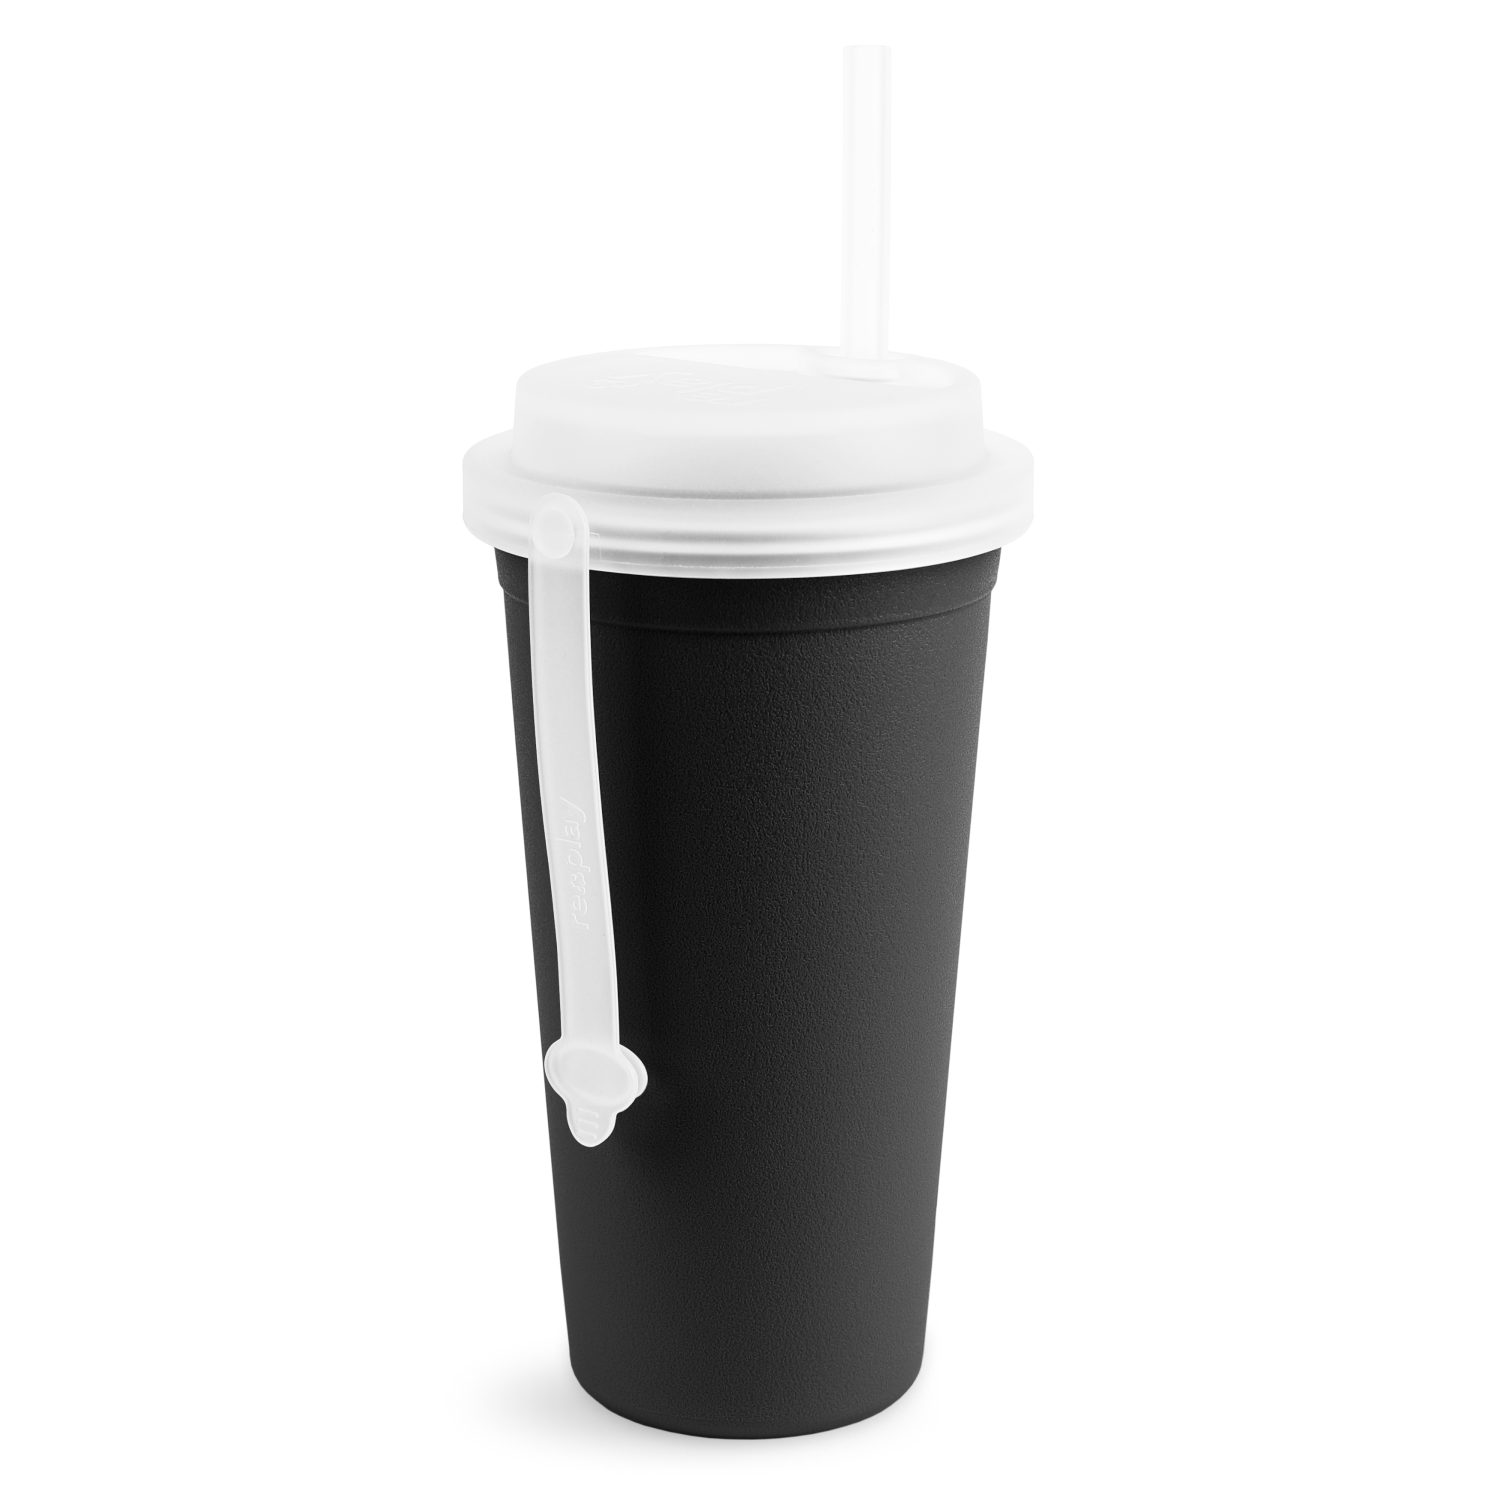 Cold 1 Tumbler Pink and Black 24 oz